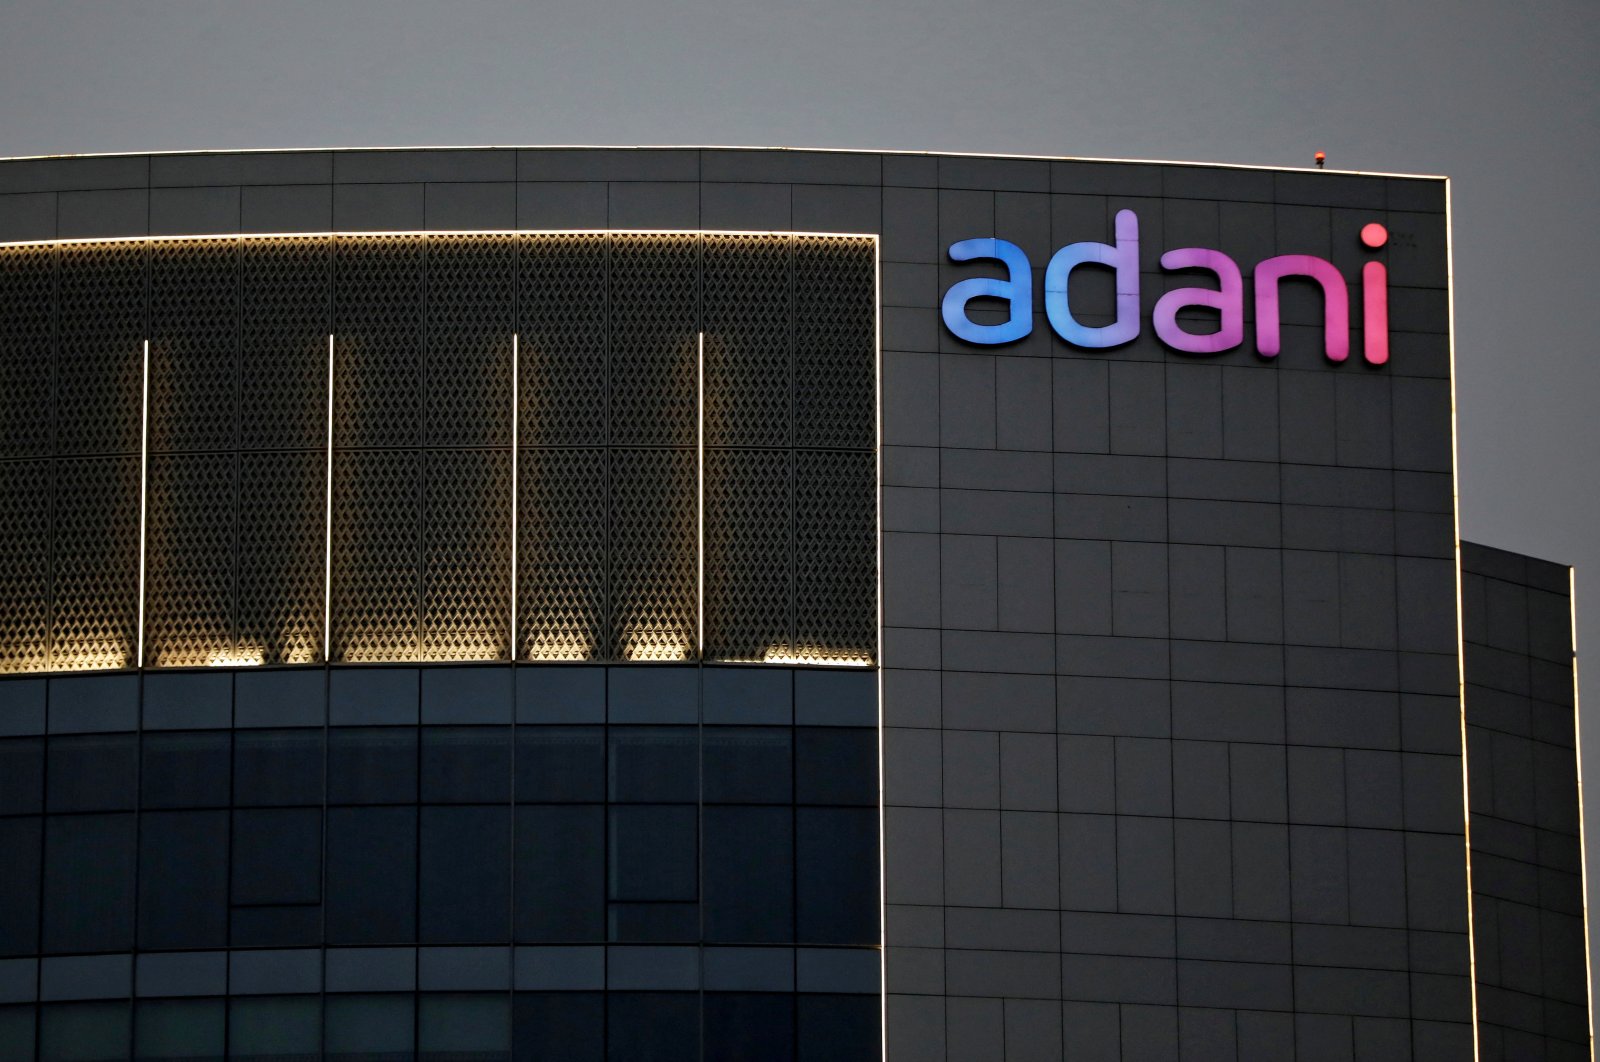 The logo of the Adani Group is seen on the facade of one of its buildings on the outskirts of Ahmedabad, India, April 13, 2021. (Reuters Photo)